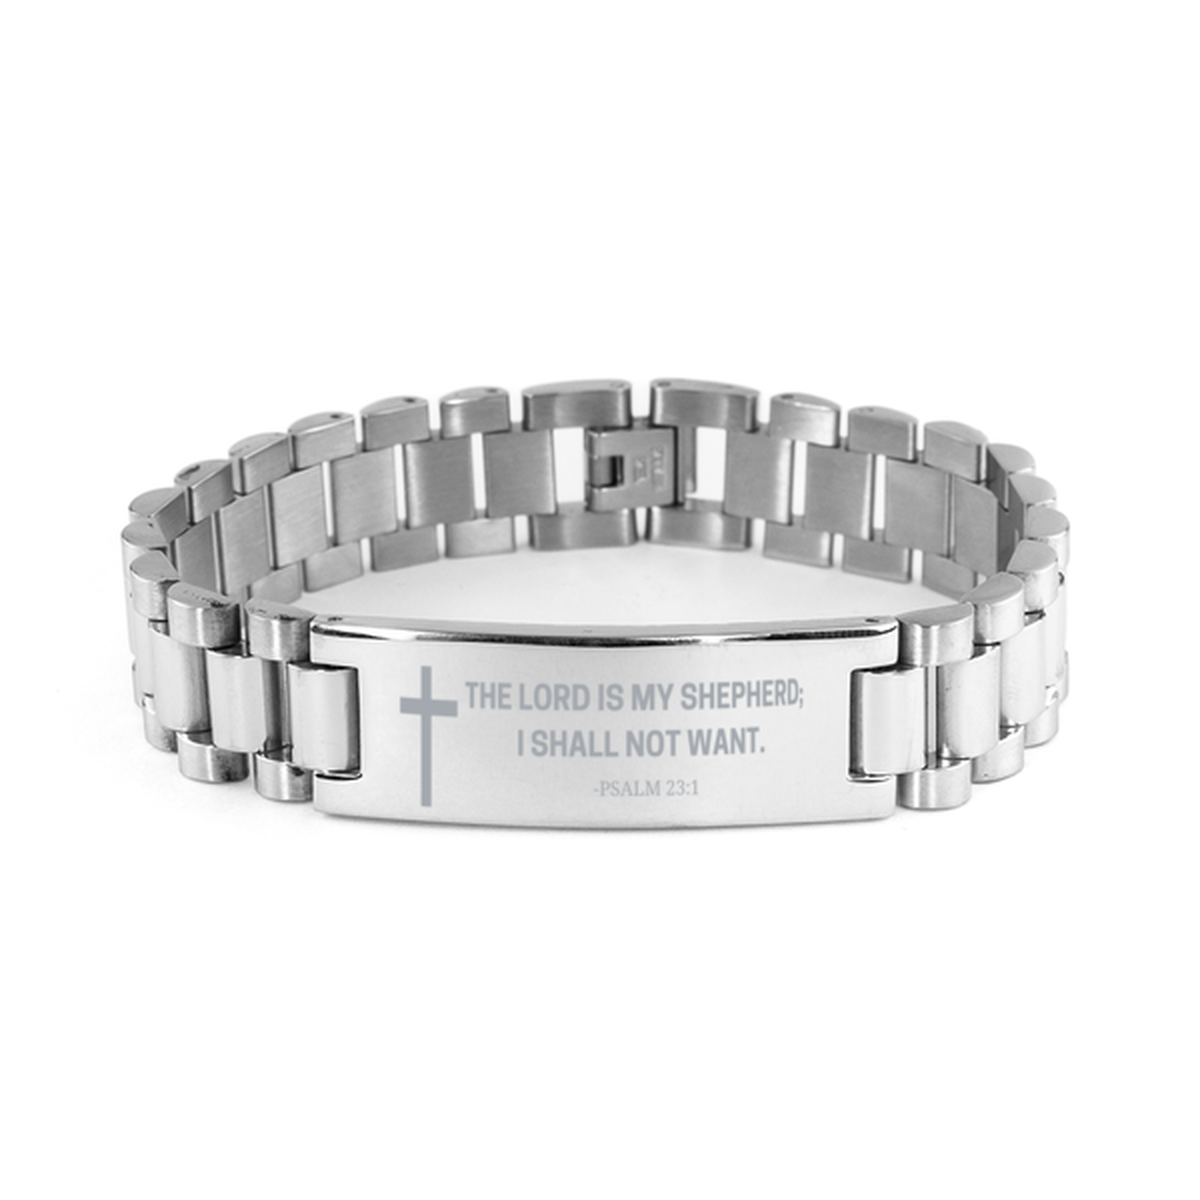 Baptism Gifts For Teenage Boys Girls, Christian Bible Verse Ladder Stainless Steel Bracelet, The Lord is my shepherd, Catholic Confirmation Gifts for Son, Godson, Grandson, Nephew